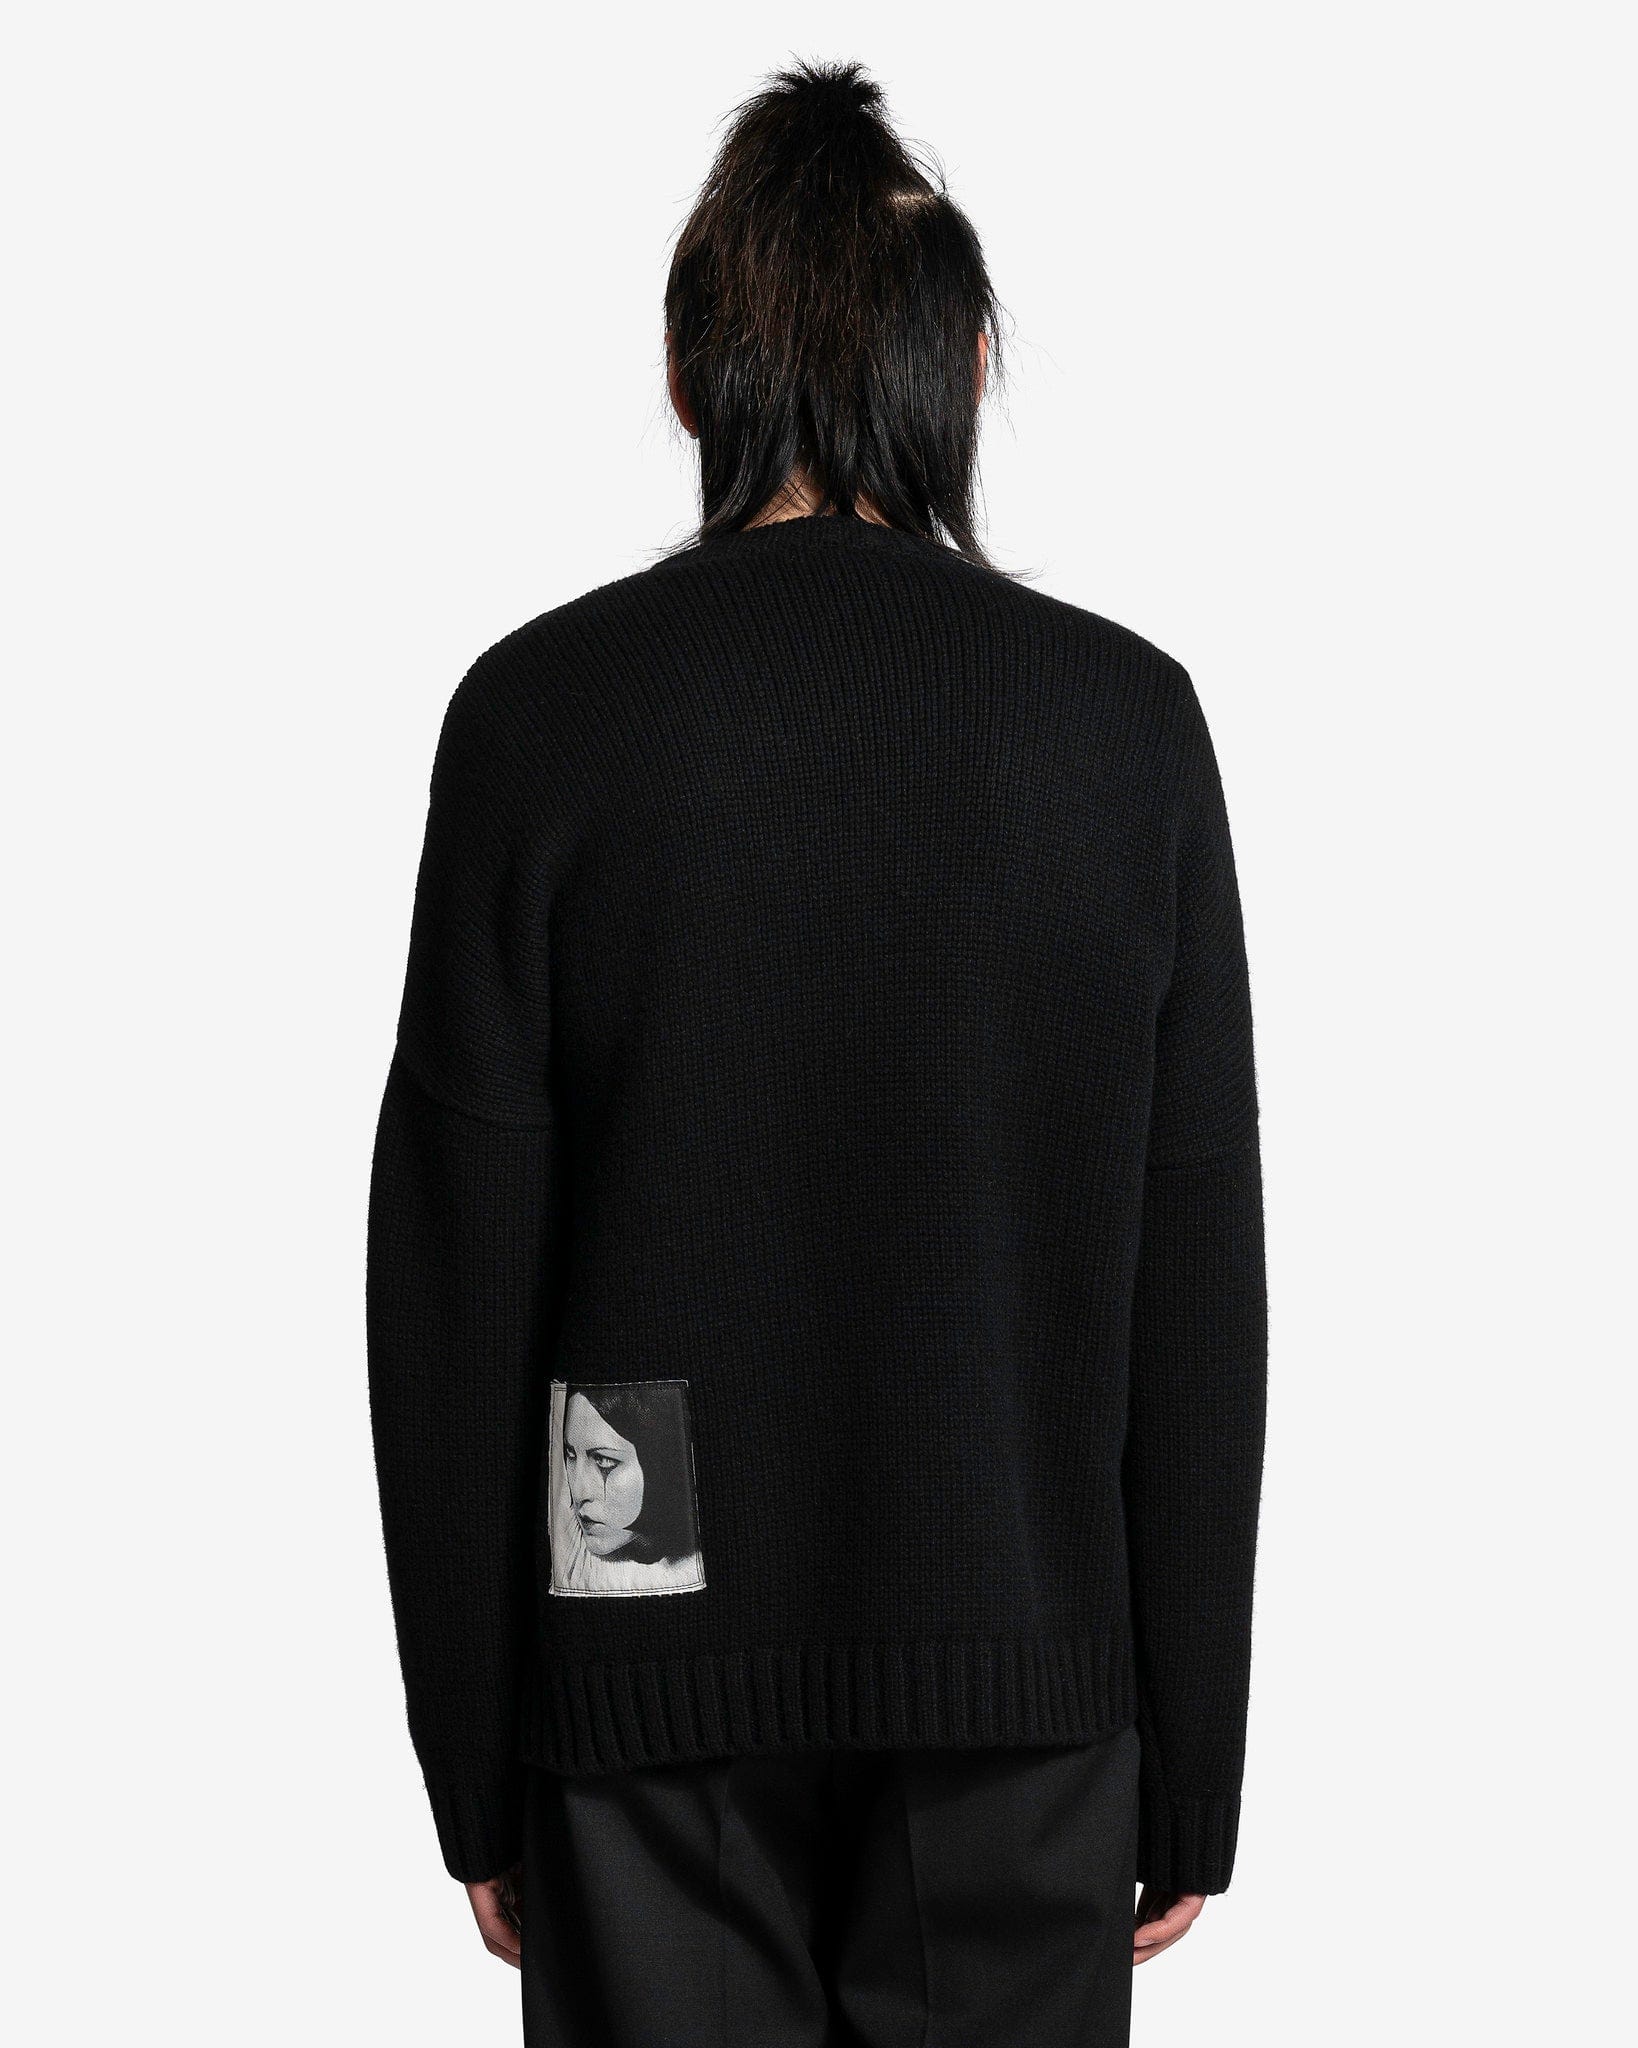 UNDERCOVER Men's Sweater Graphic Knit Sweater with Patch in Black